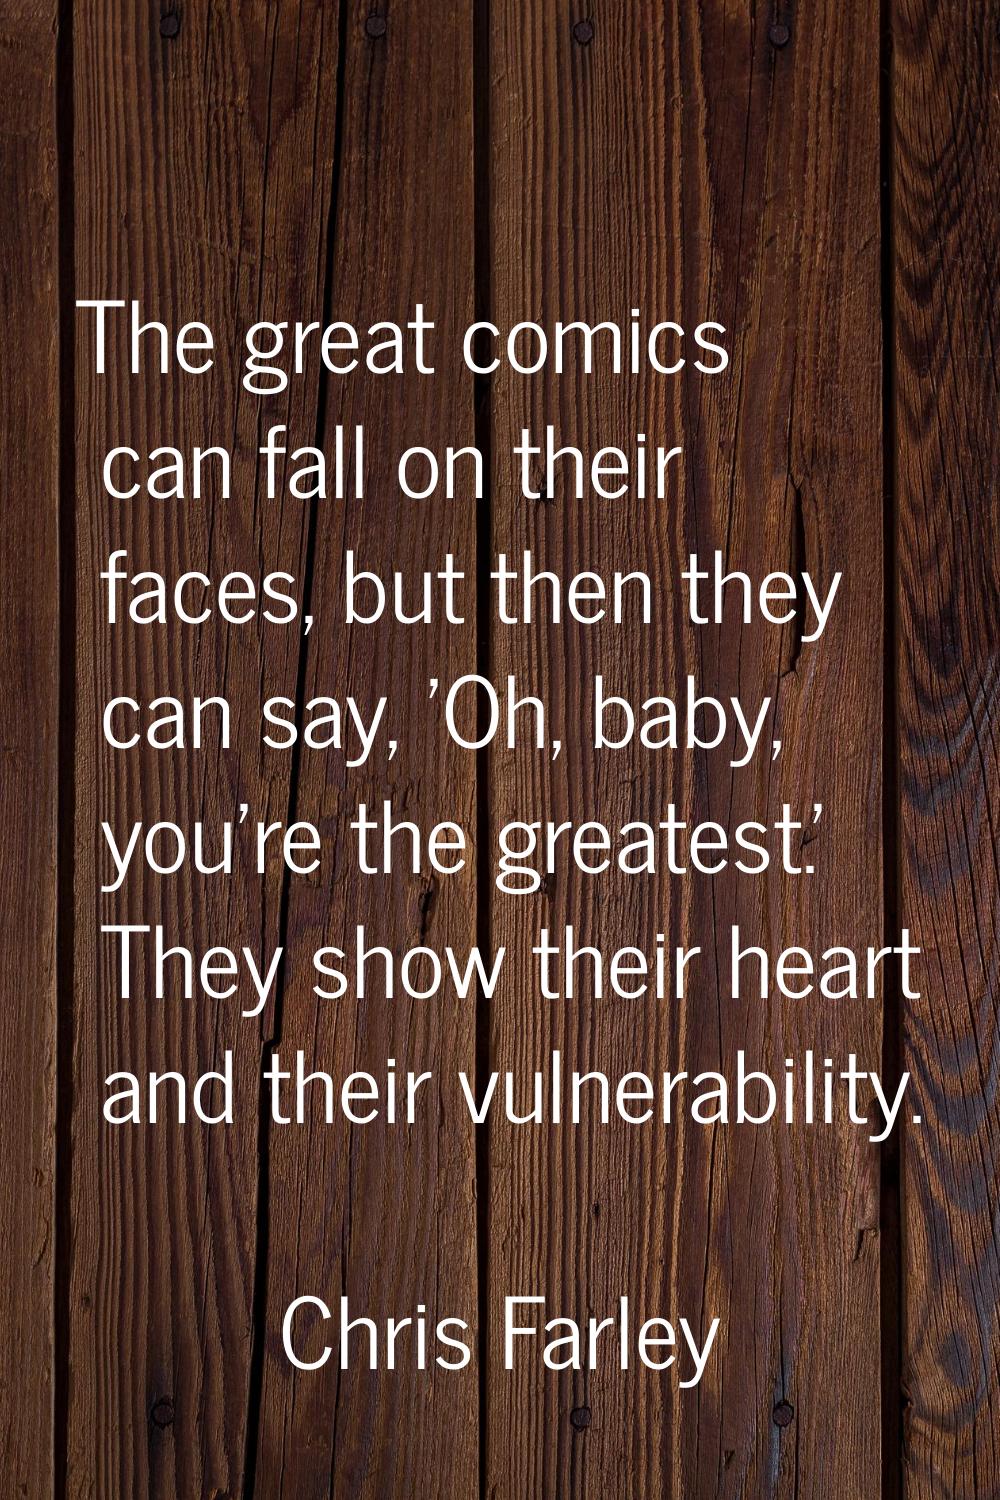 The great comics can fall on their faces, but then they can say, 'Oh, baby, you're the greatest.' T